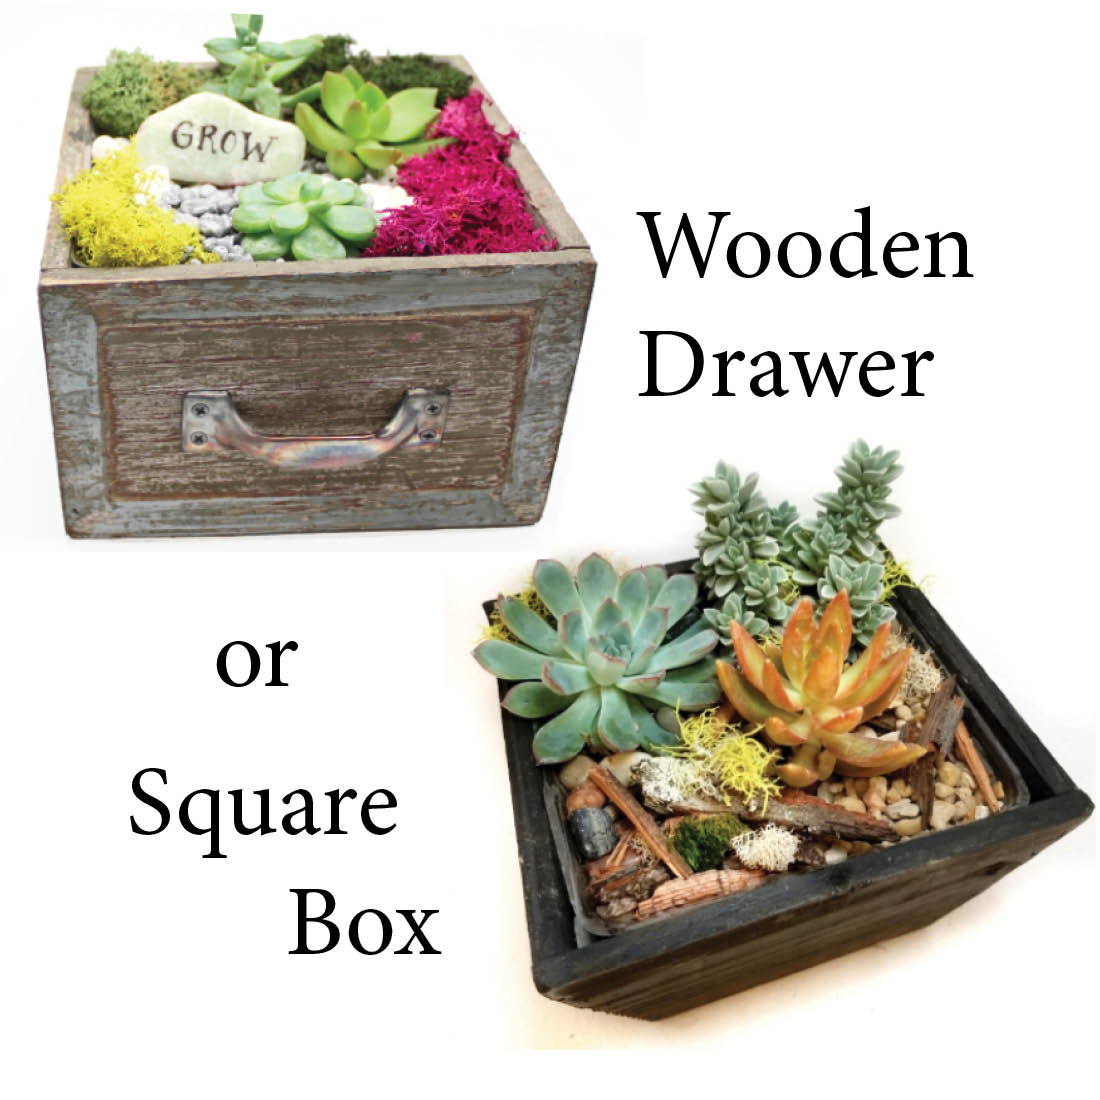 A Wooden Drawer or Square Box plant nite project by Yaymaker